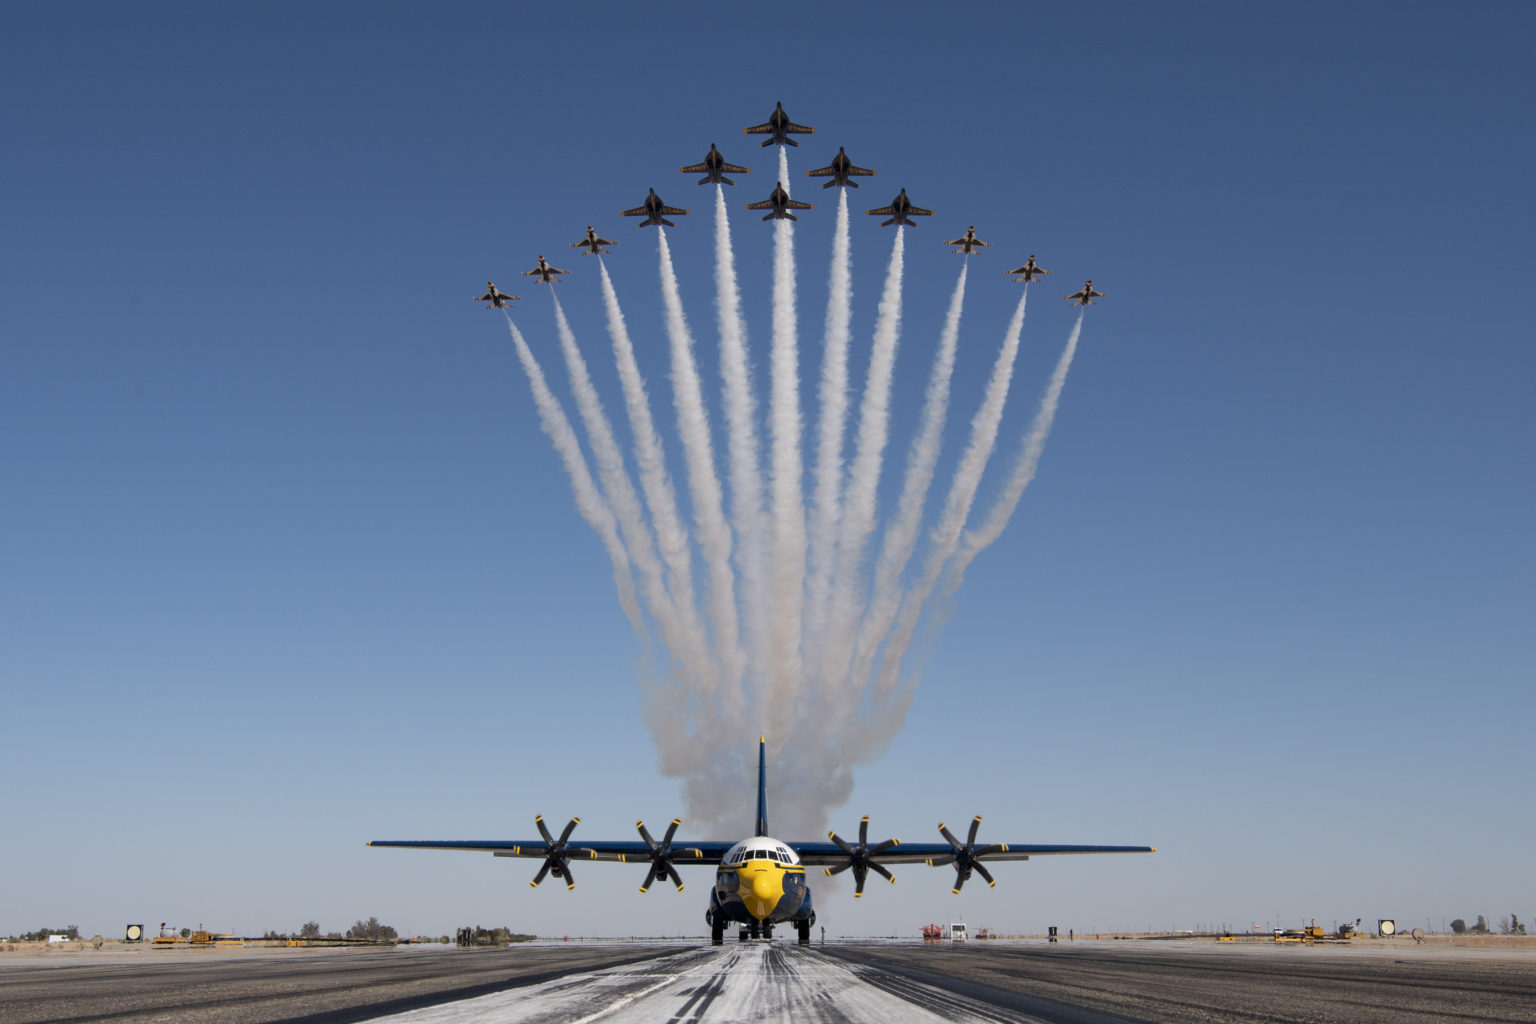 Thunderbirds and Blue Angels debut the Super Delta formation Alert 5